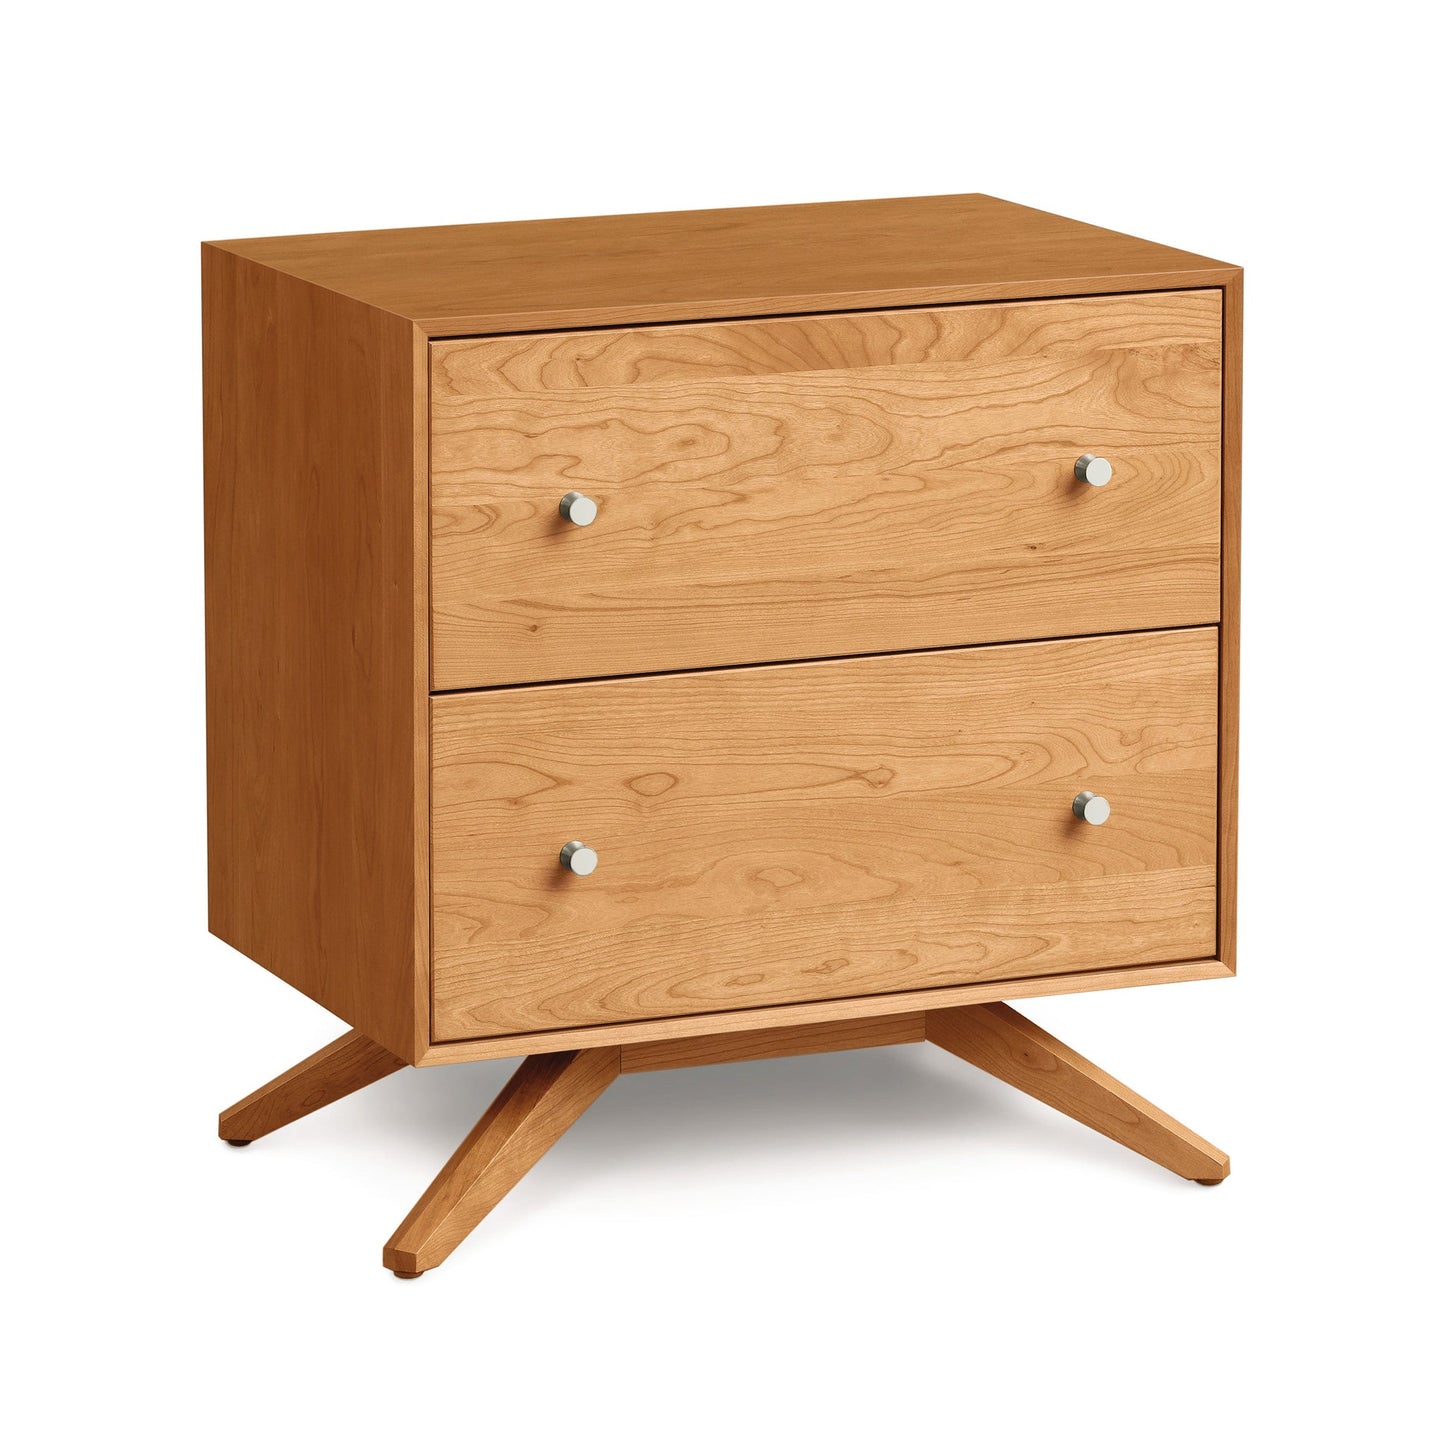 A wooden nightstand with two drawers.